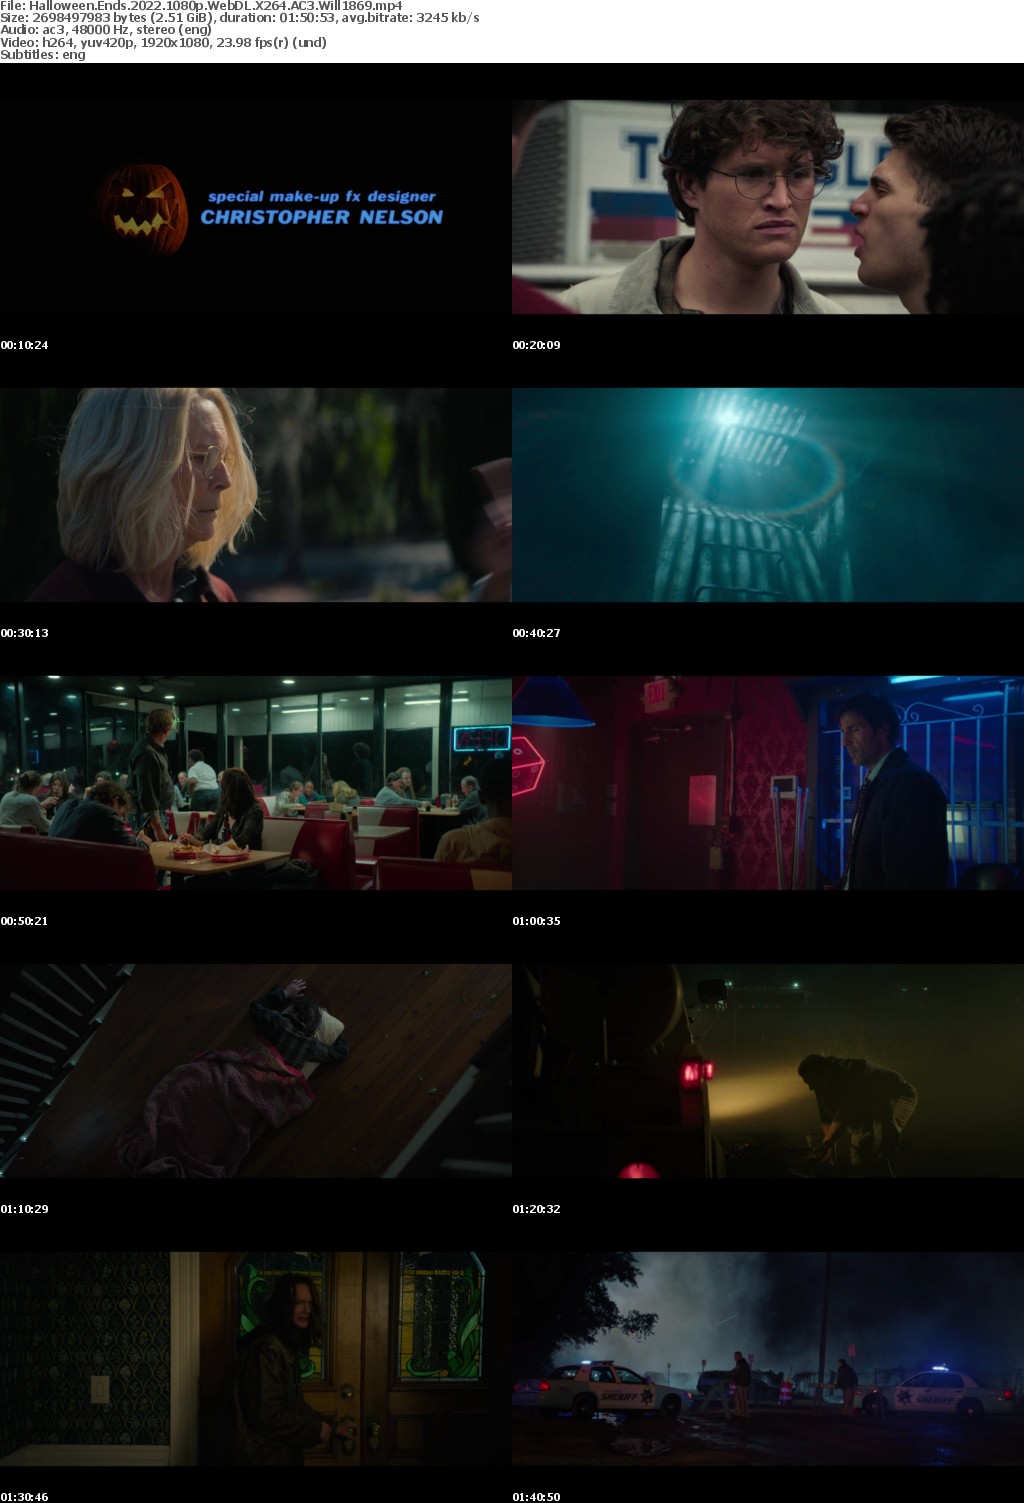 Halloween Ends 2022 1080p WebDL X264 AC3 Will1869